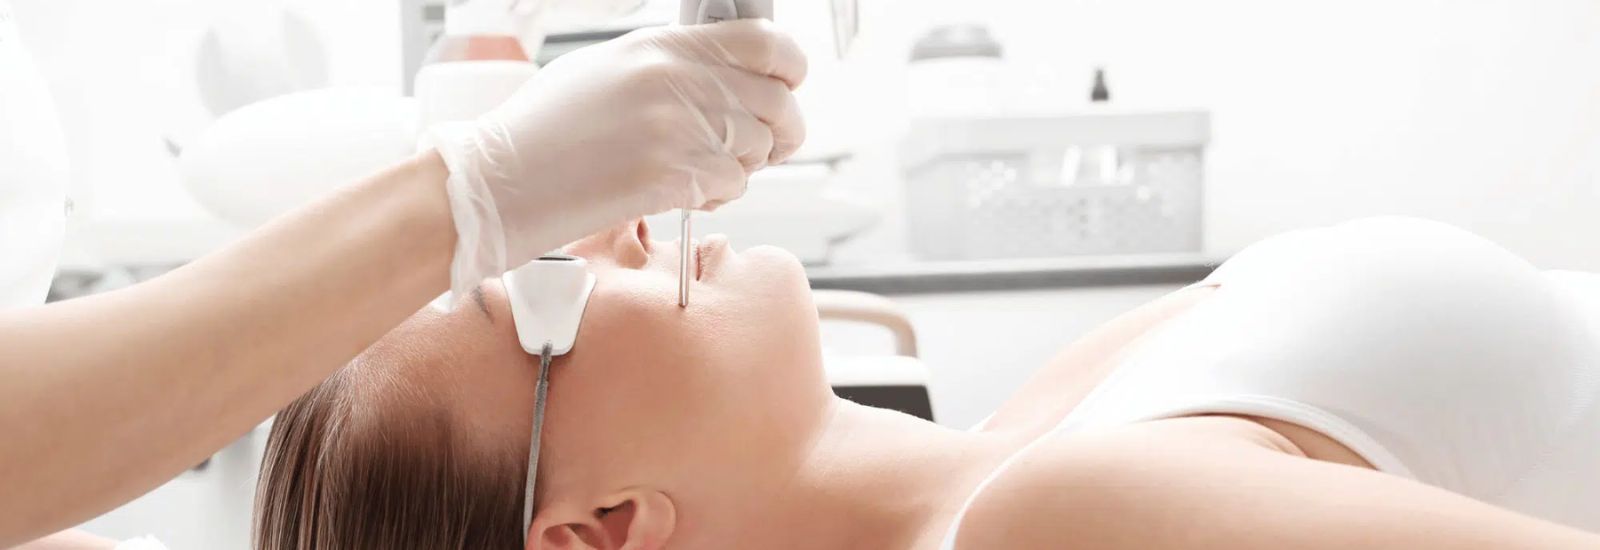 Fraxel laser vs. RF microneedling: Which One Is Best?